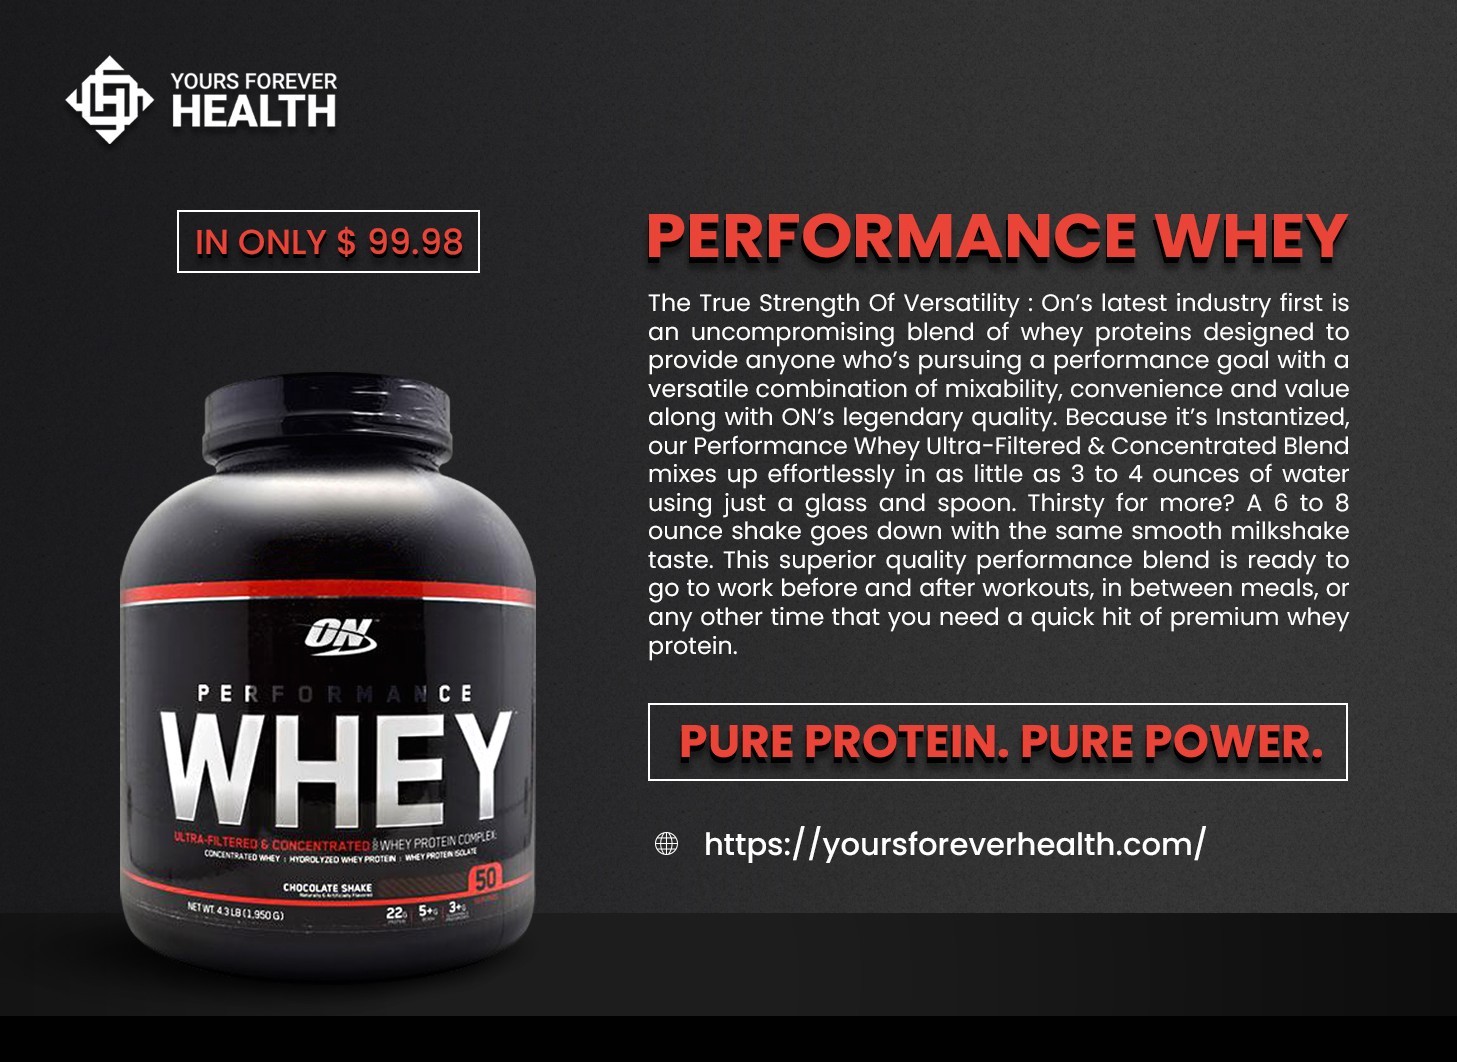 Performance Whey especially designed to boost your workout